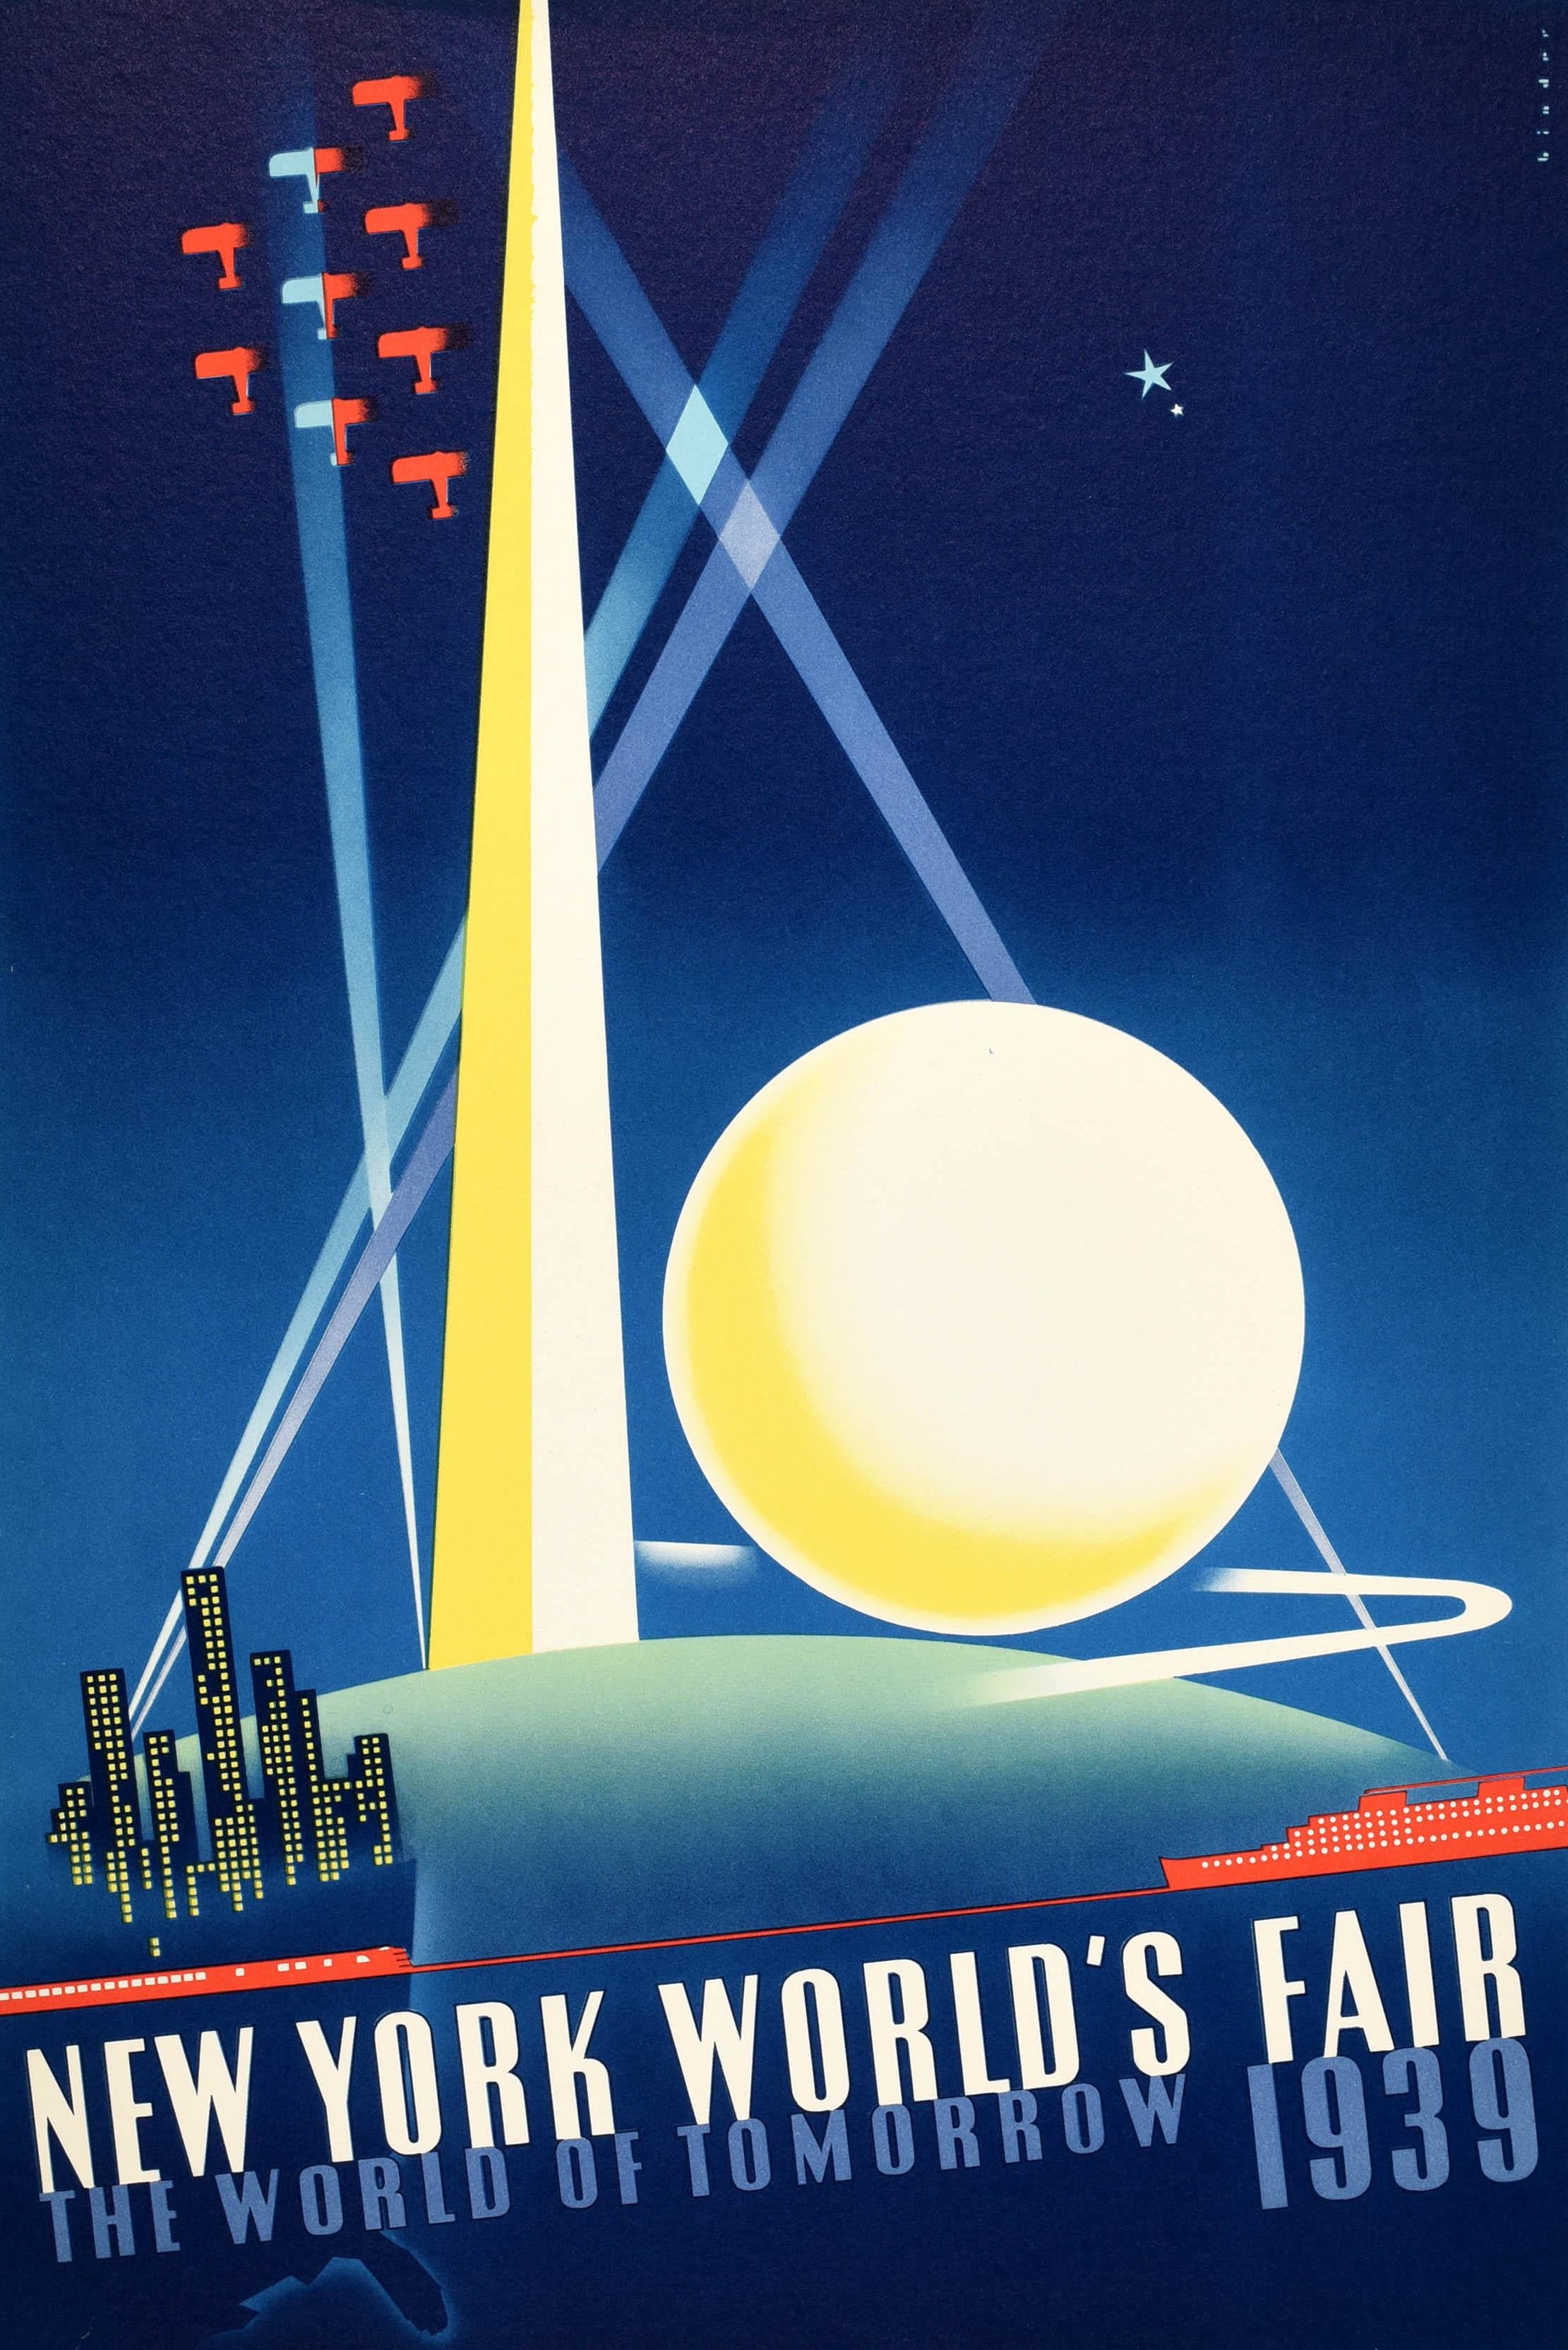 Original vintage travel advertising poster for the World Fair event held in New York at Flushing Meadows-Corona Park from 30 April 1939 to 31 October 1940. Great Art Deco design by Joseph Binder (1898-1972) depicting the Trylon and Perisphere